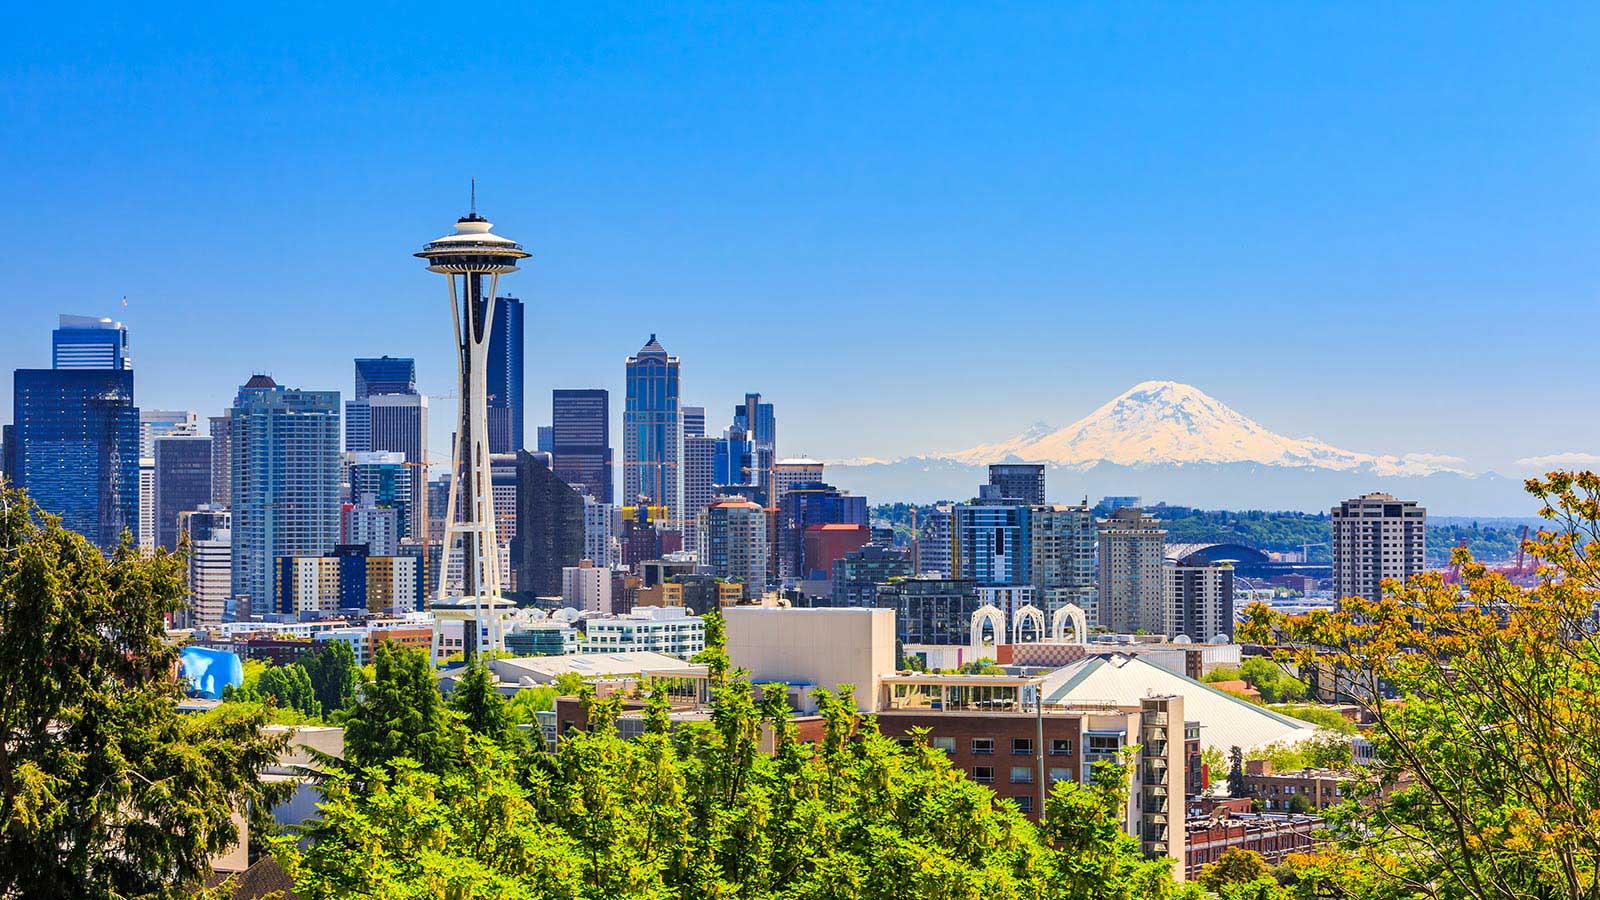 Seattle city skyline with snow-capped mountain in distance